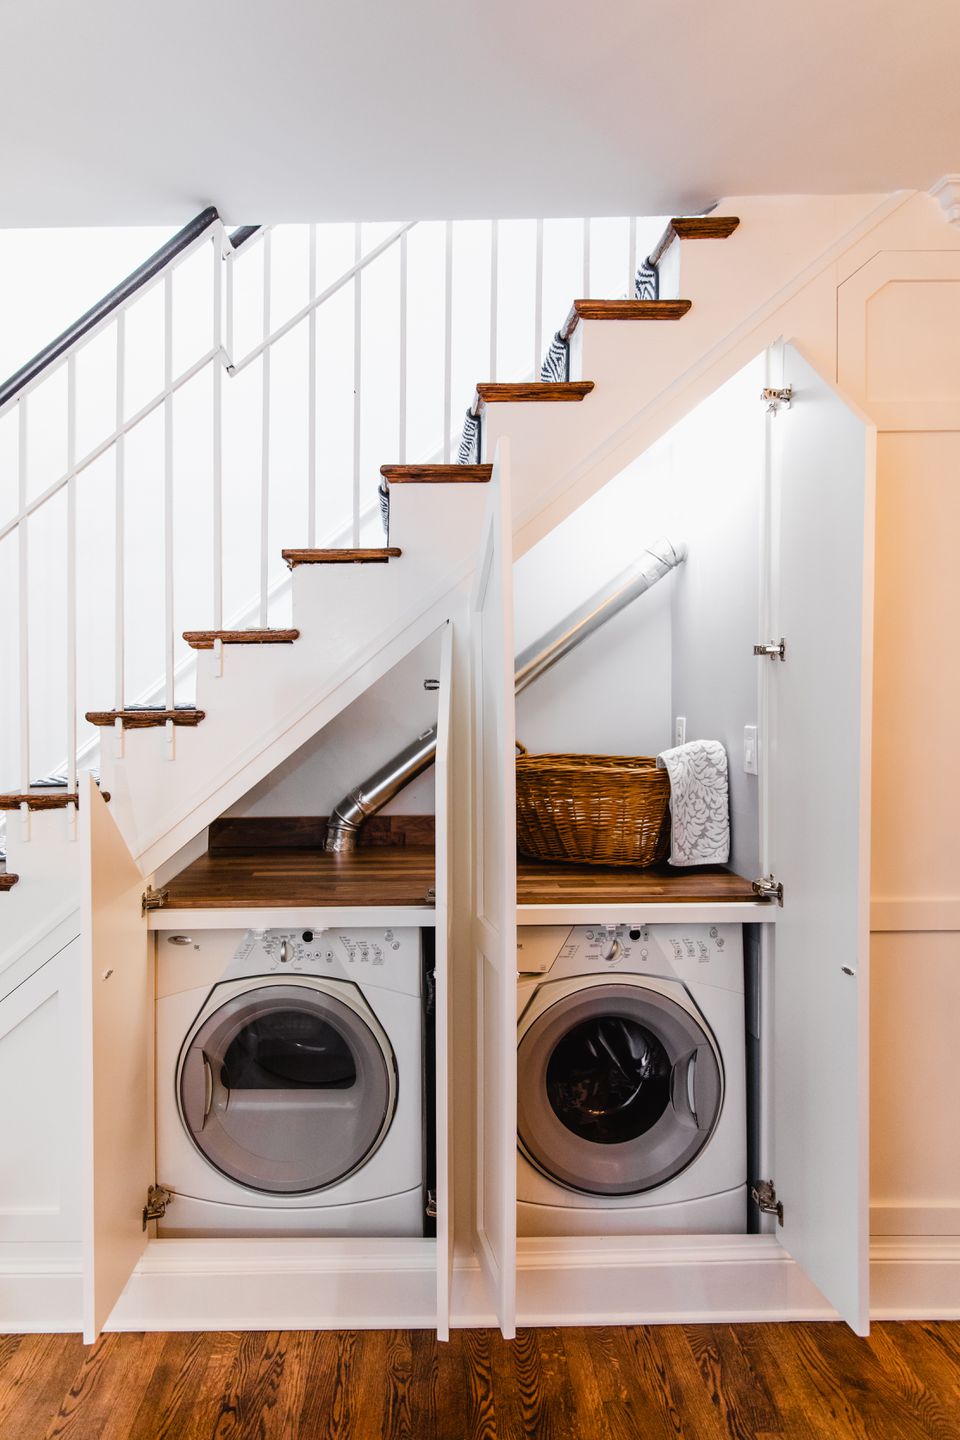 Most Creative Under The Stairs Home Designs - Washer dryer under the stairs